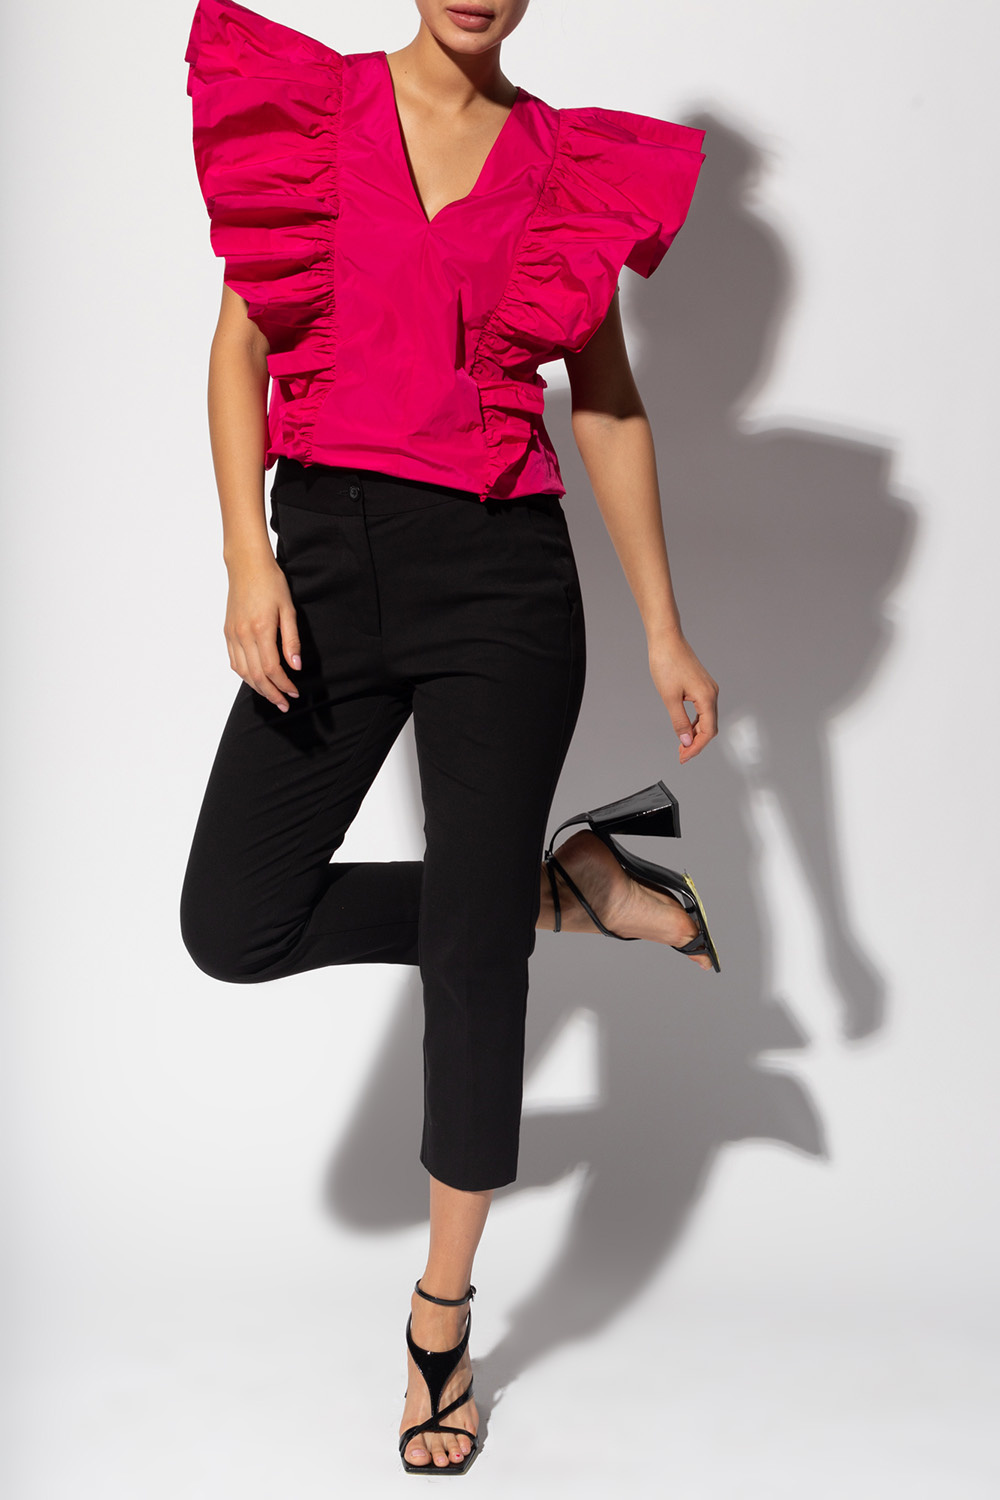 Kate Spade Pleat-front trousers